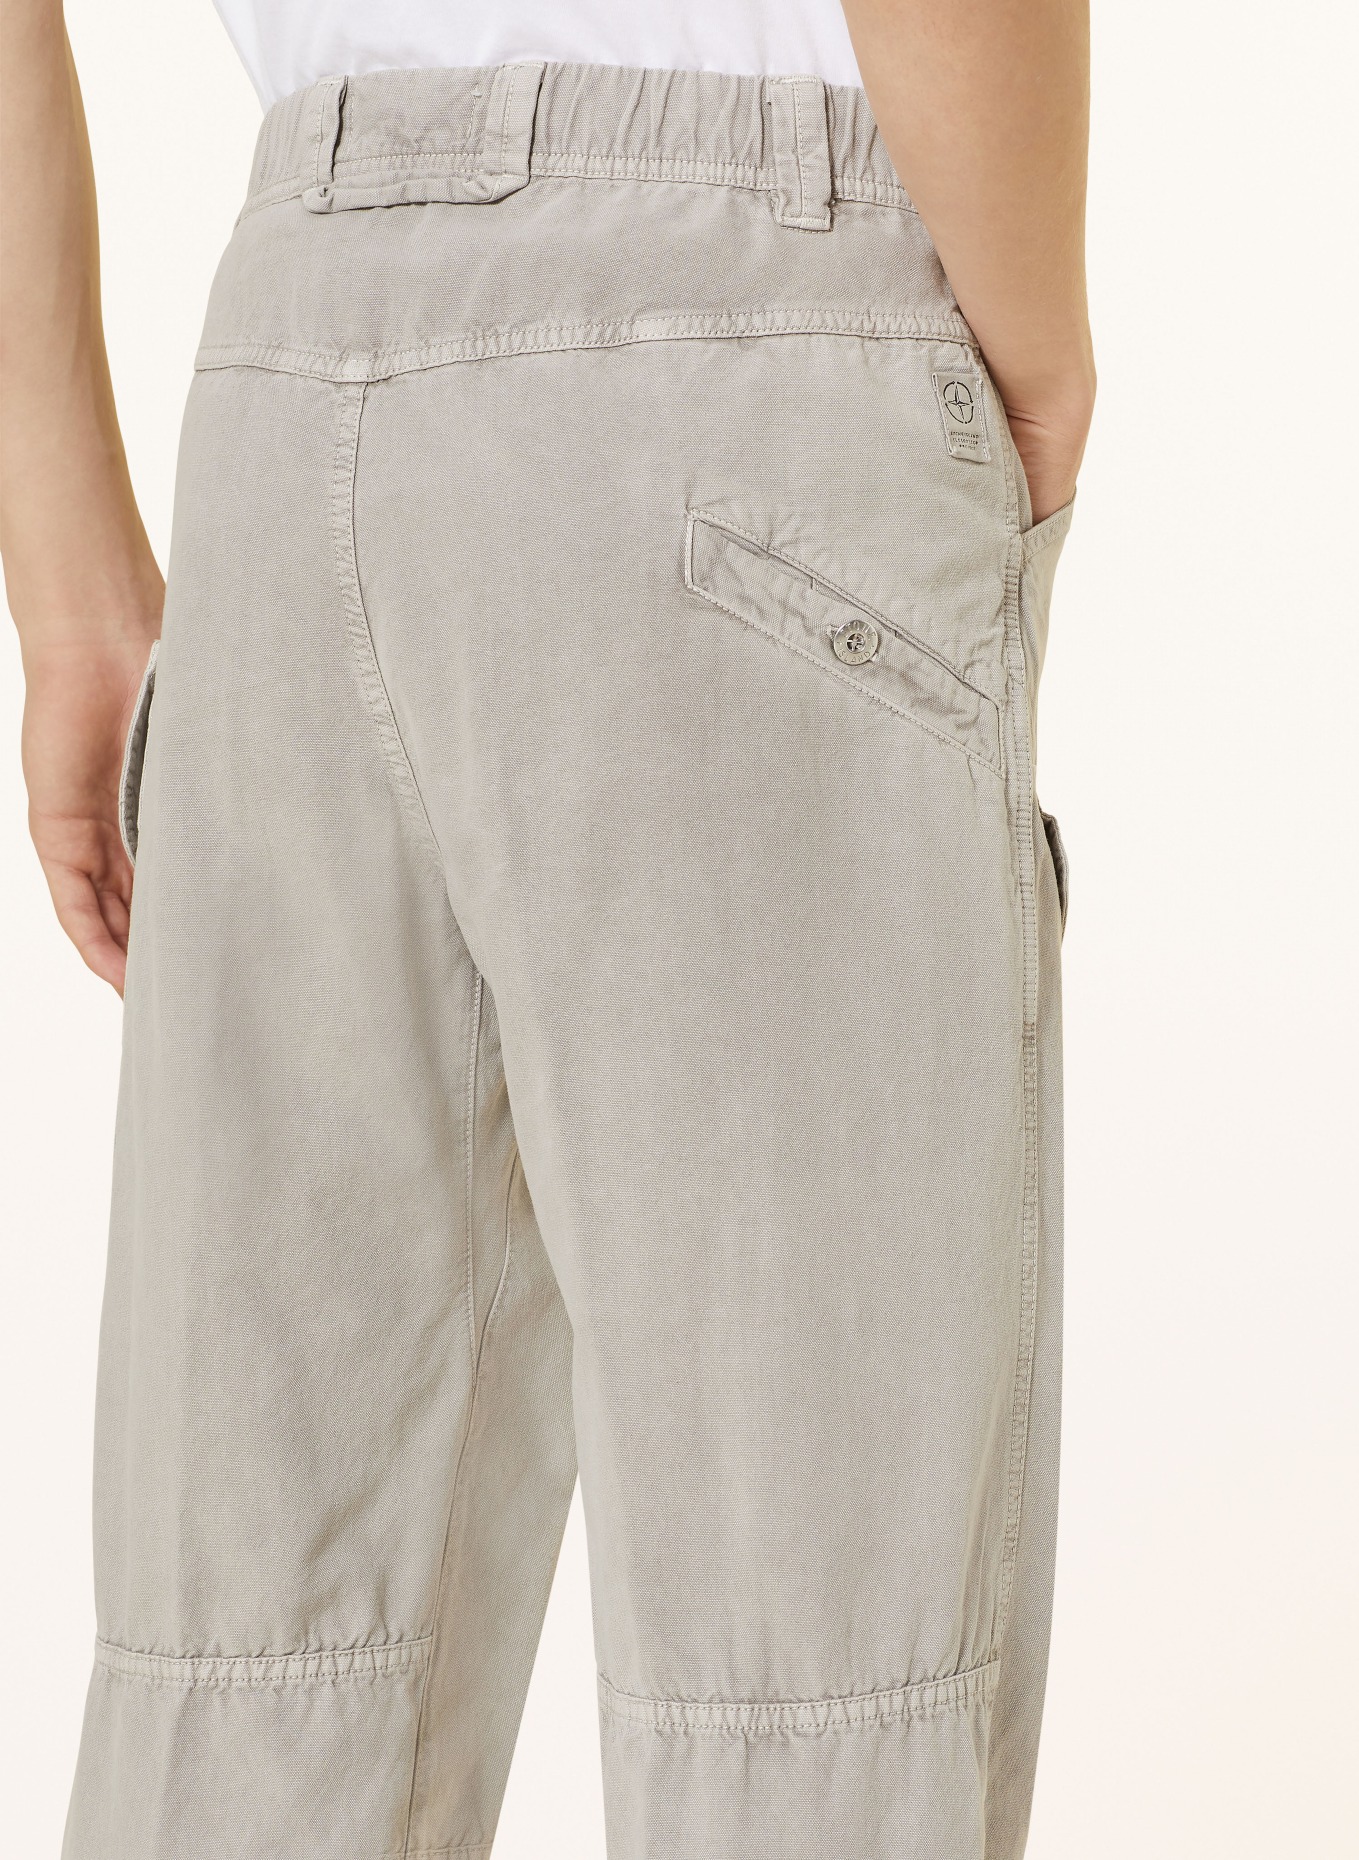 STONE ISLAND Cargo pants regular fit, Color: GRAY (Image 6)